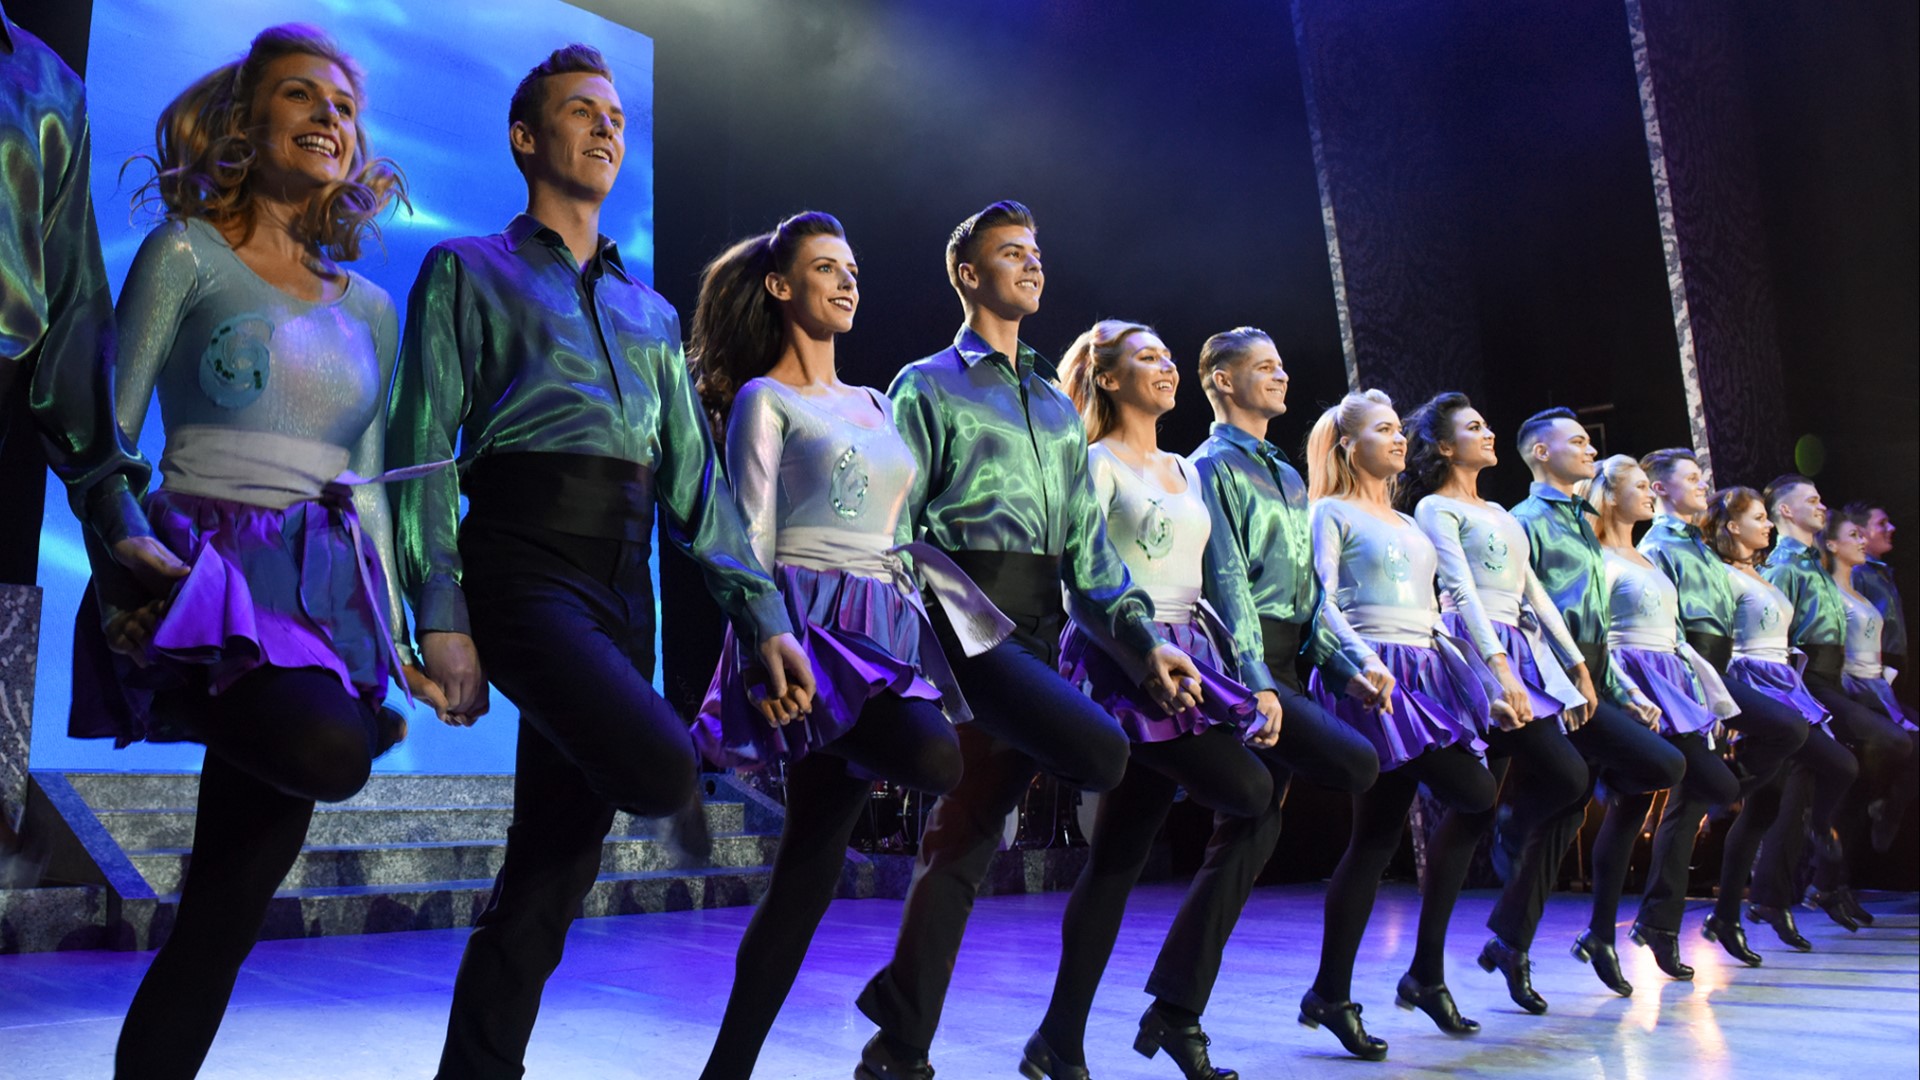 The Riverdance 25th Anniversary Show will play at Denver's Buell Theatre through June 4.